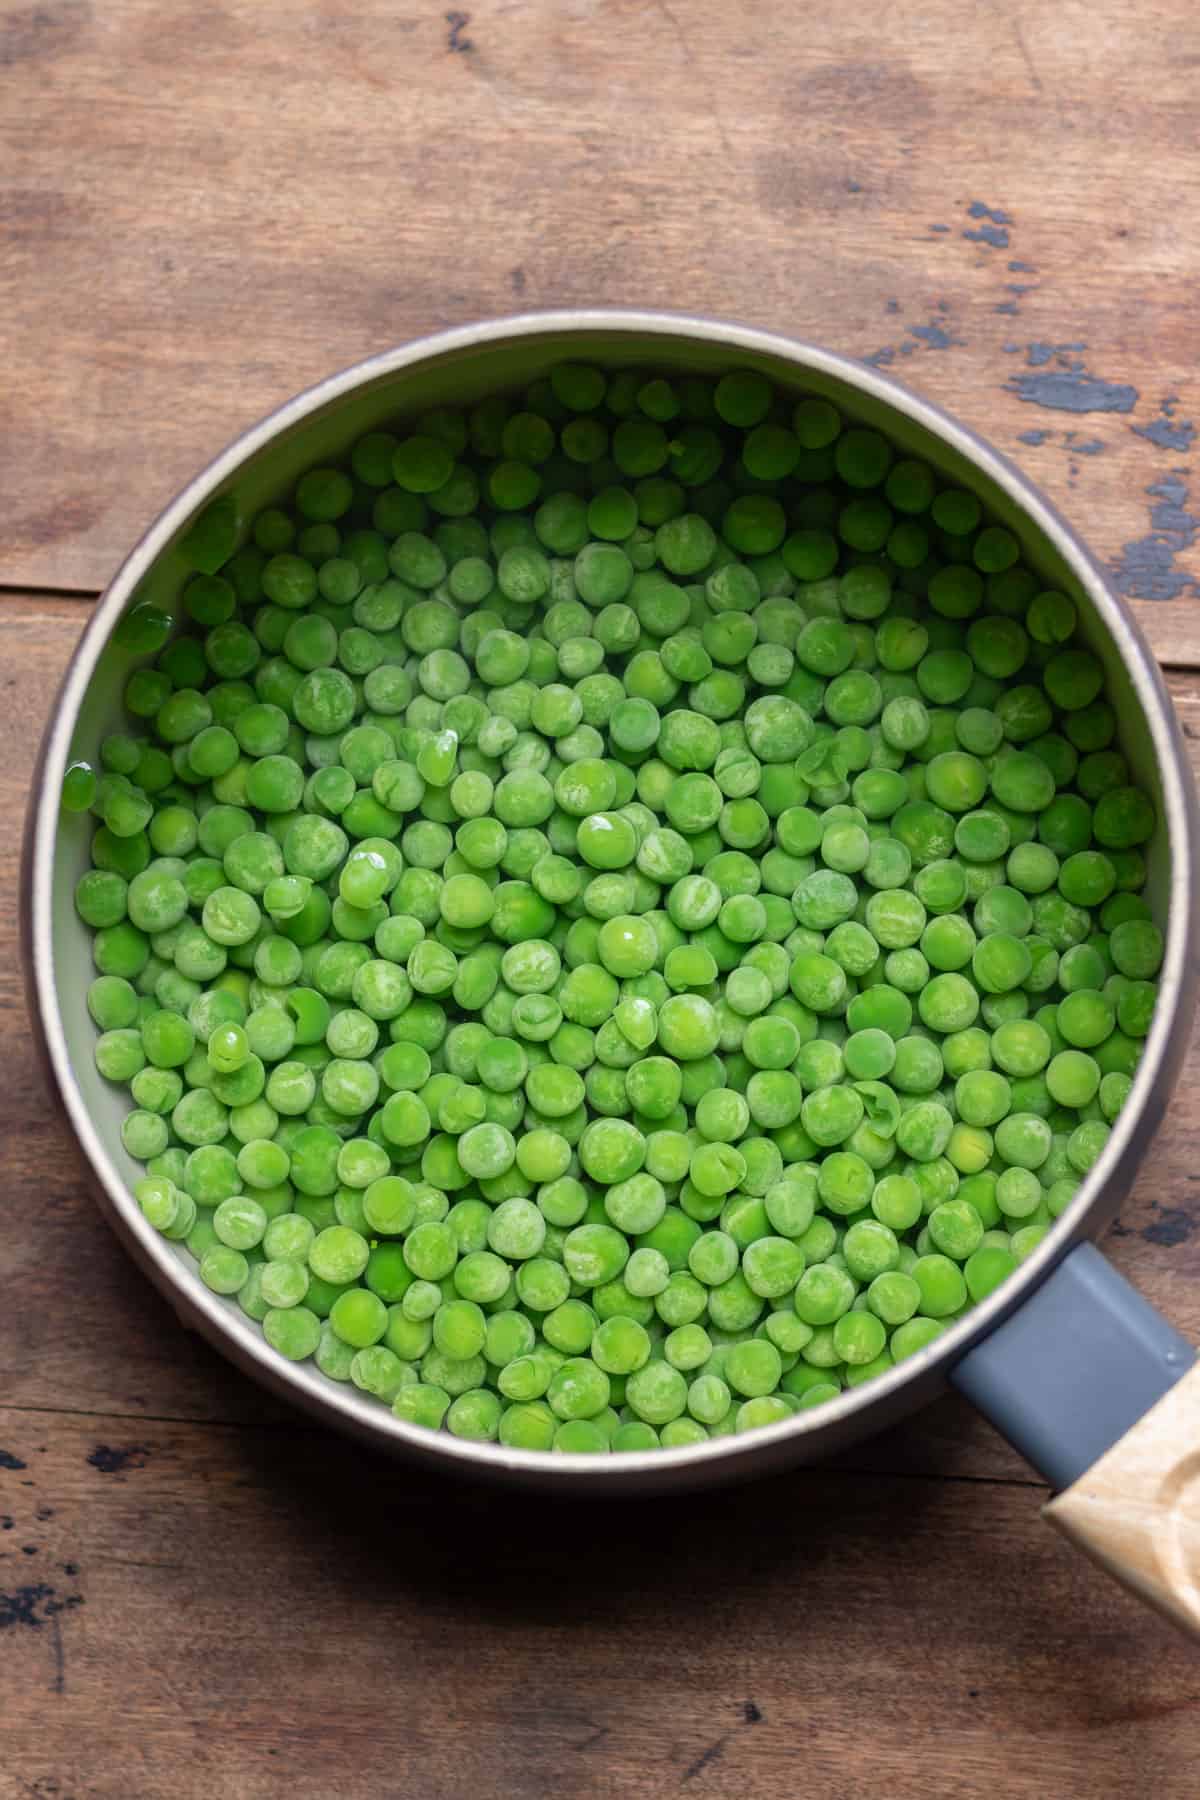 Peas boiling in a pot.